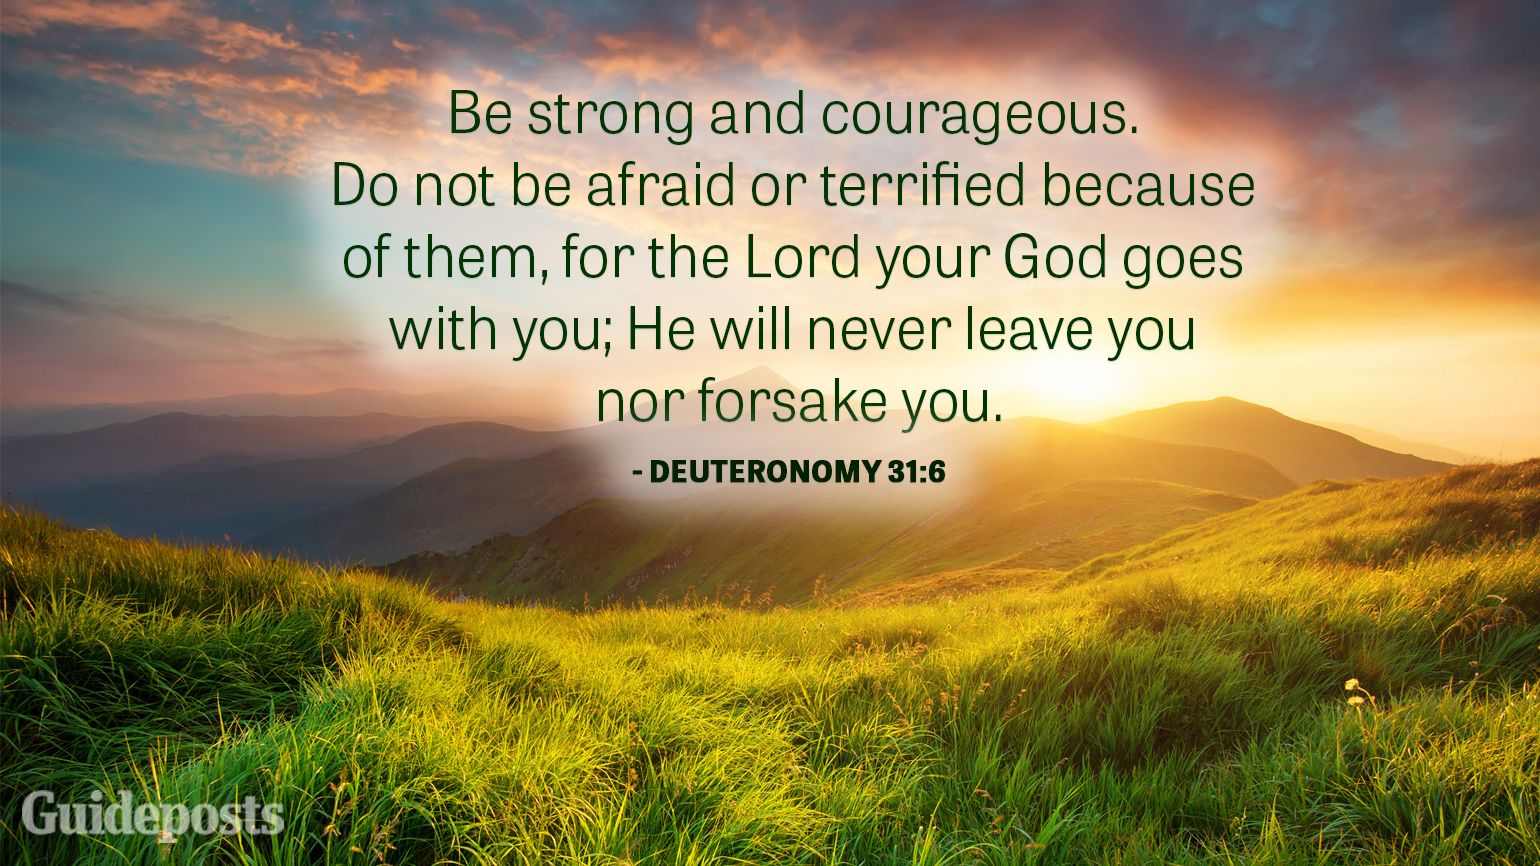 Be strong and courageous. Do not be afraid or terrified because of them, for the Lord your God goes with you; He will never leave you nor forsake you.